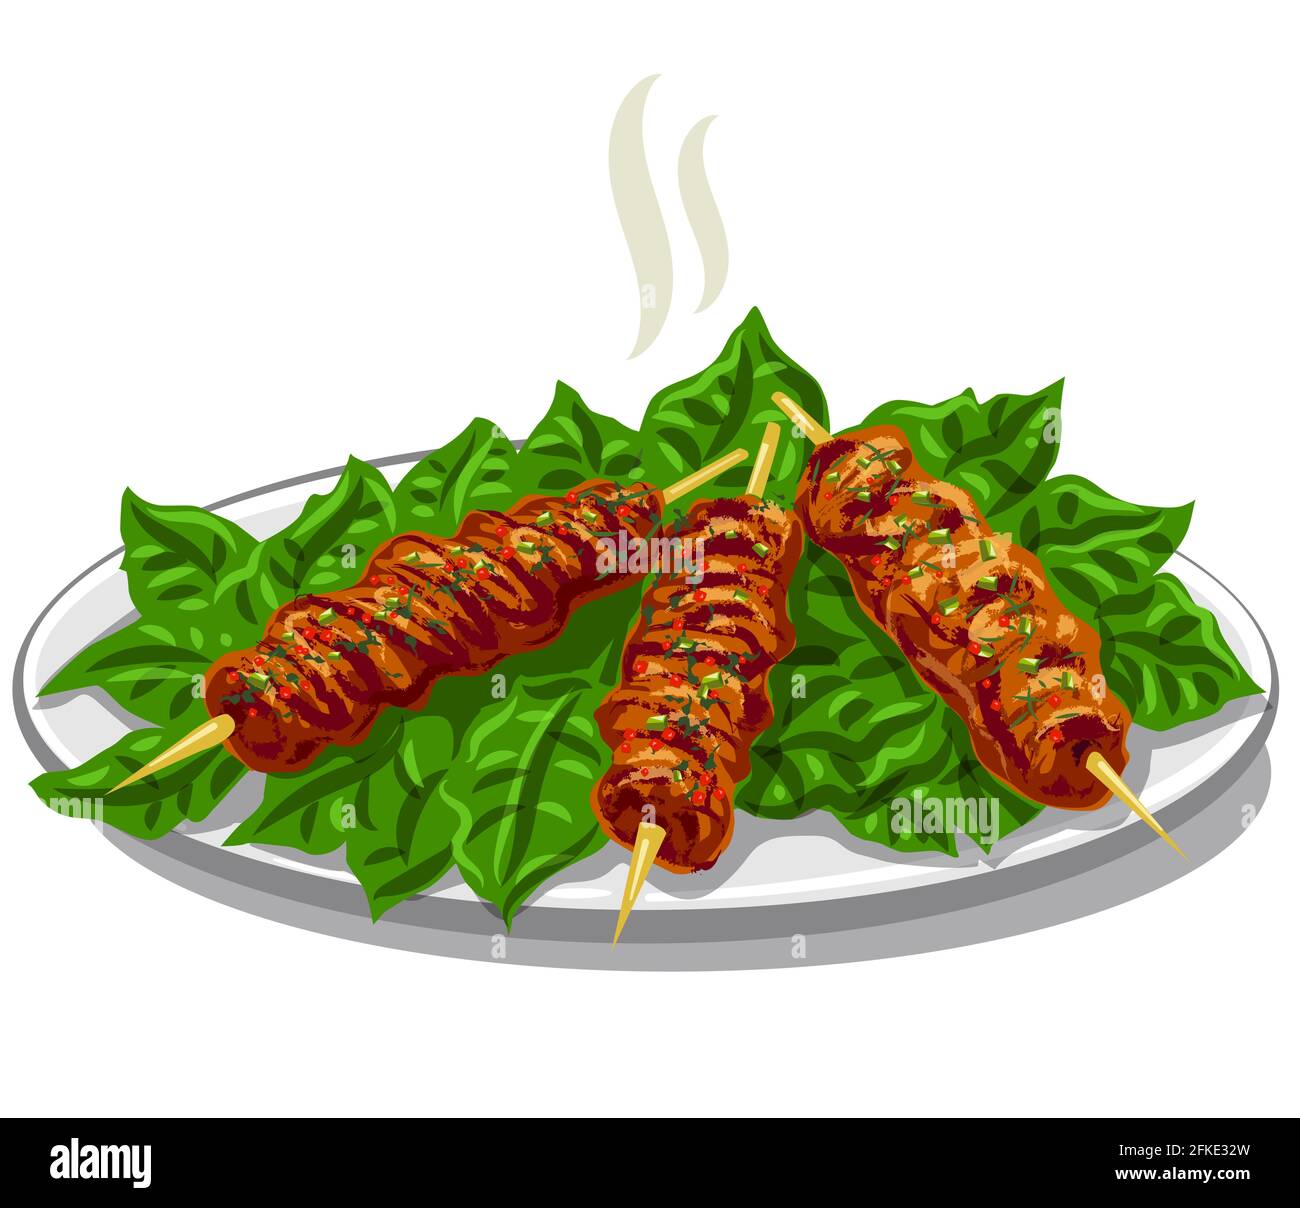 Illustration of the traditional turkish kofta kebab with greens on the plate Stock Vector